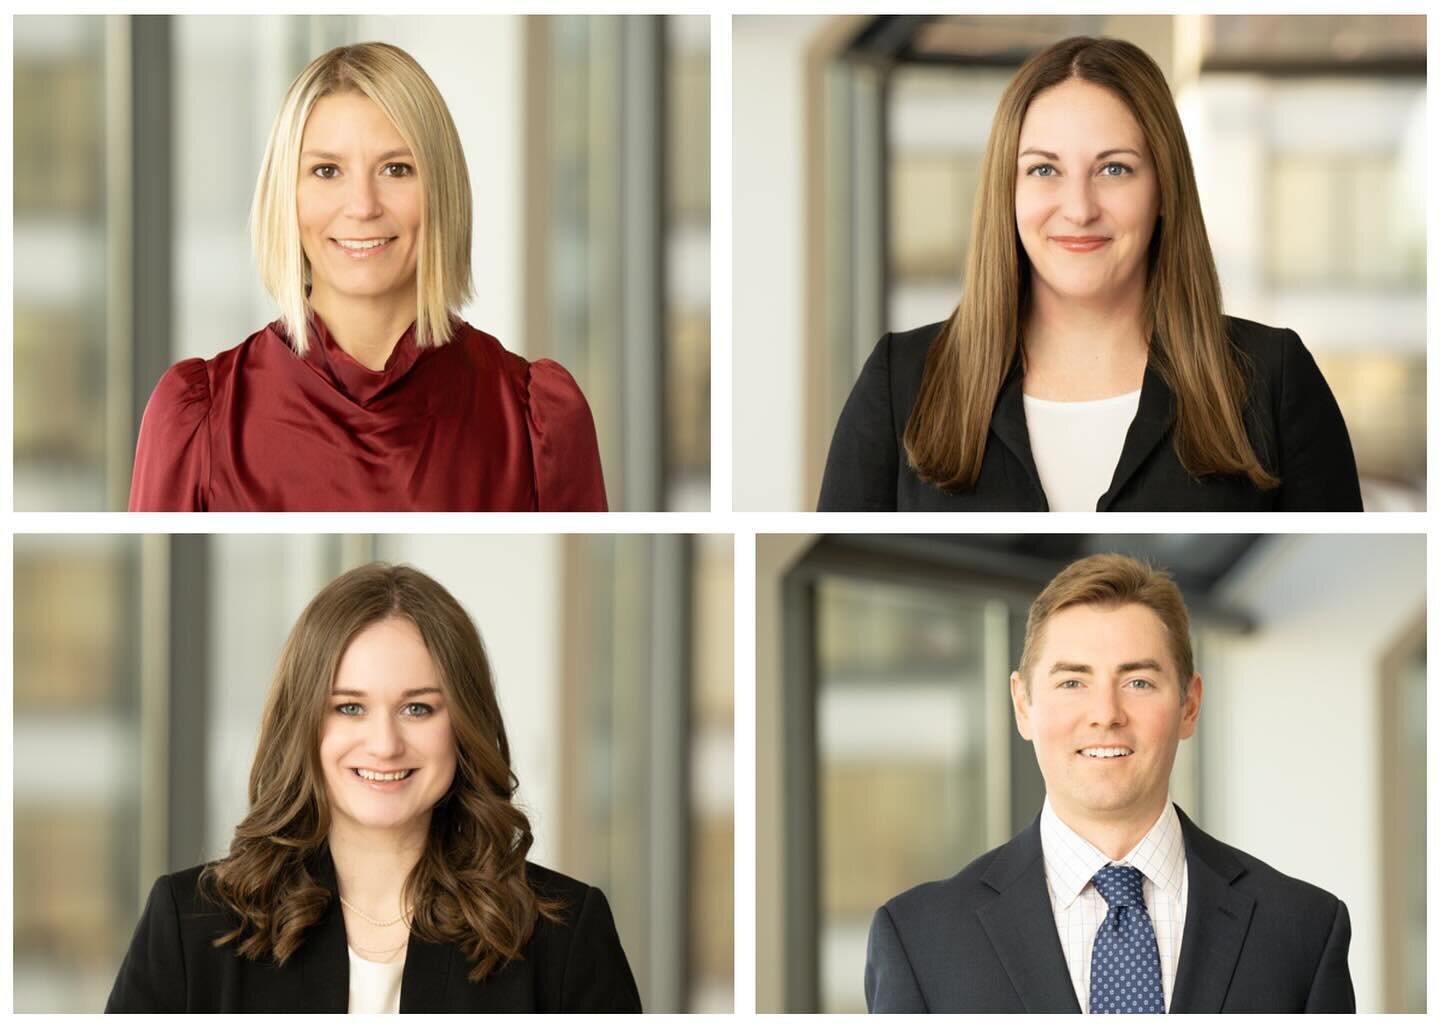 Latest headshots for #attorney hires for a long-standing and beloved client 
-
#chicagolawyer #headshots